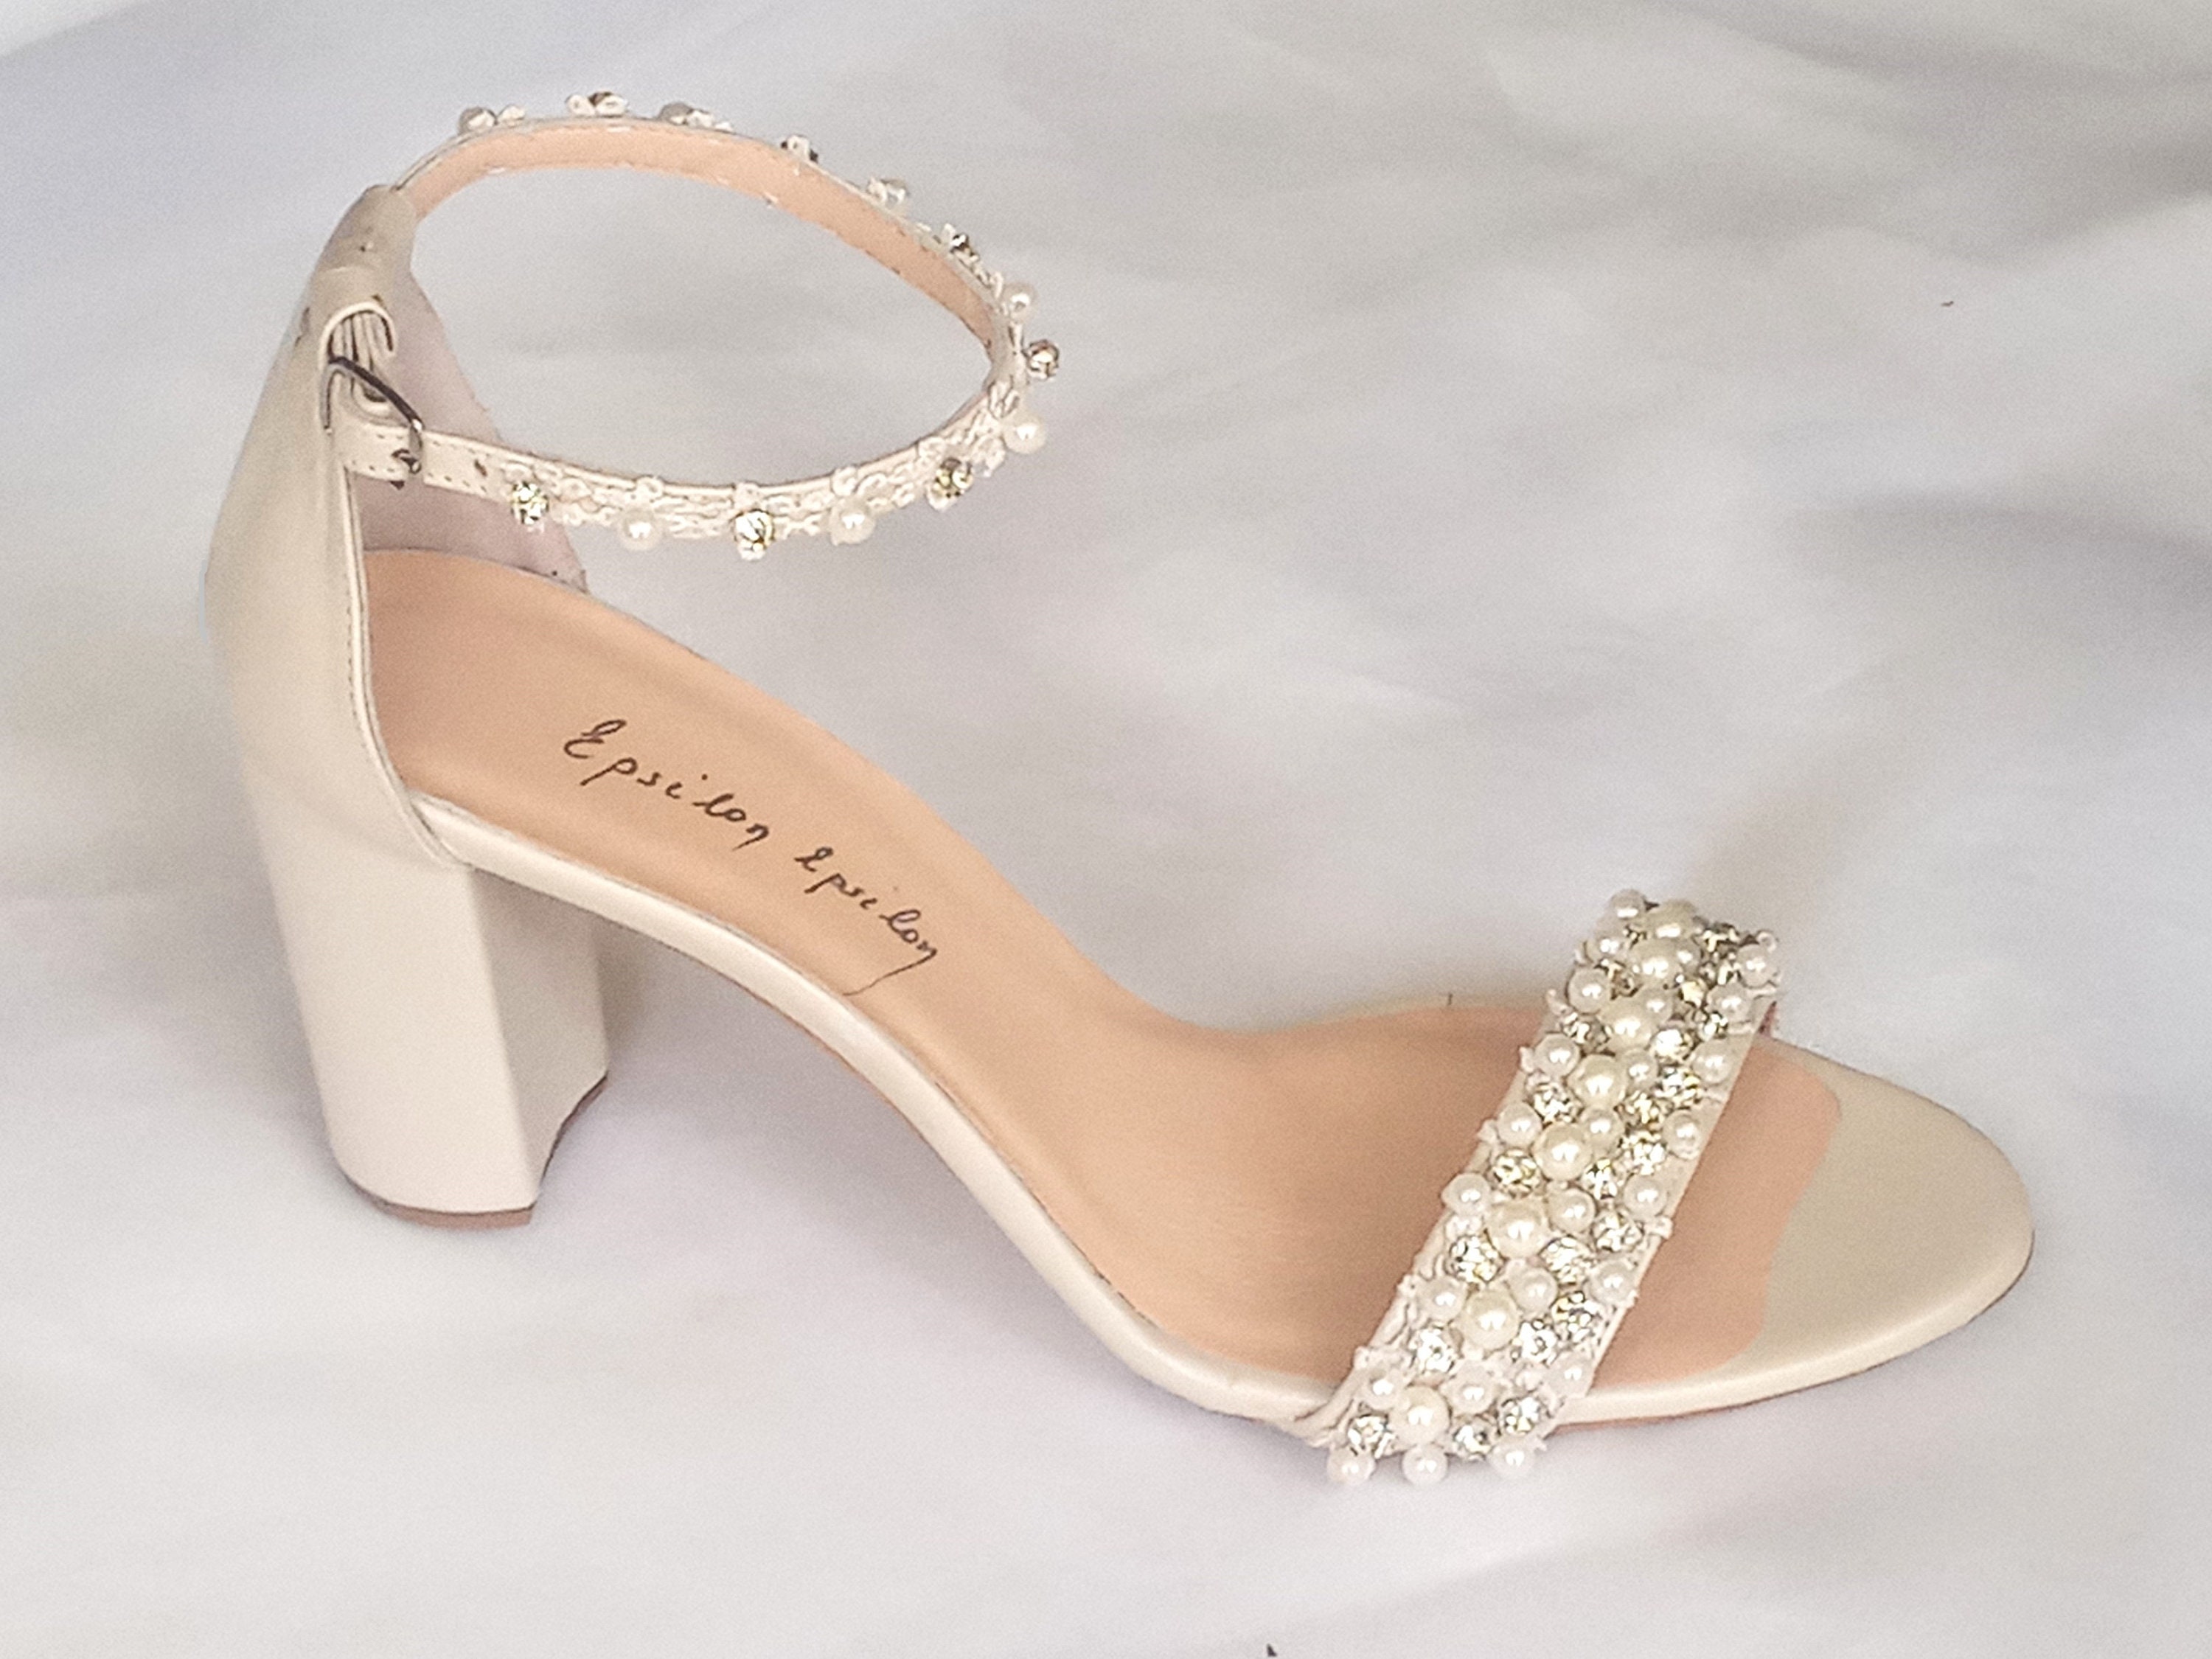 Ivory pearl wedding shoes for bride/ bridal shoes block heel/ | Etsy